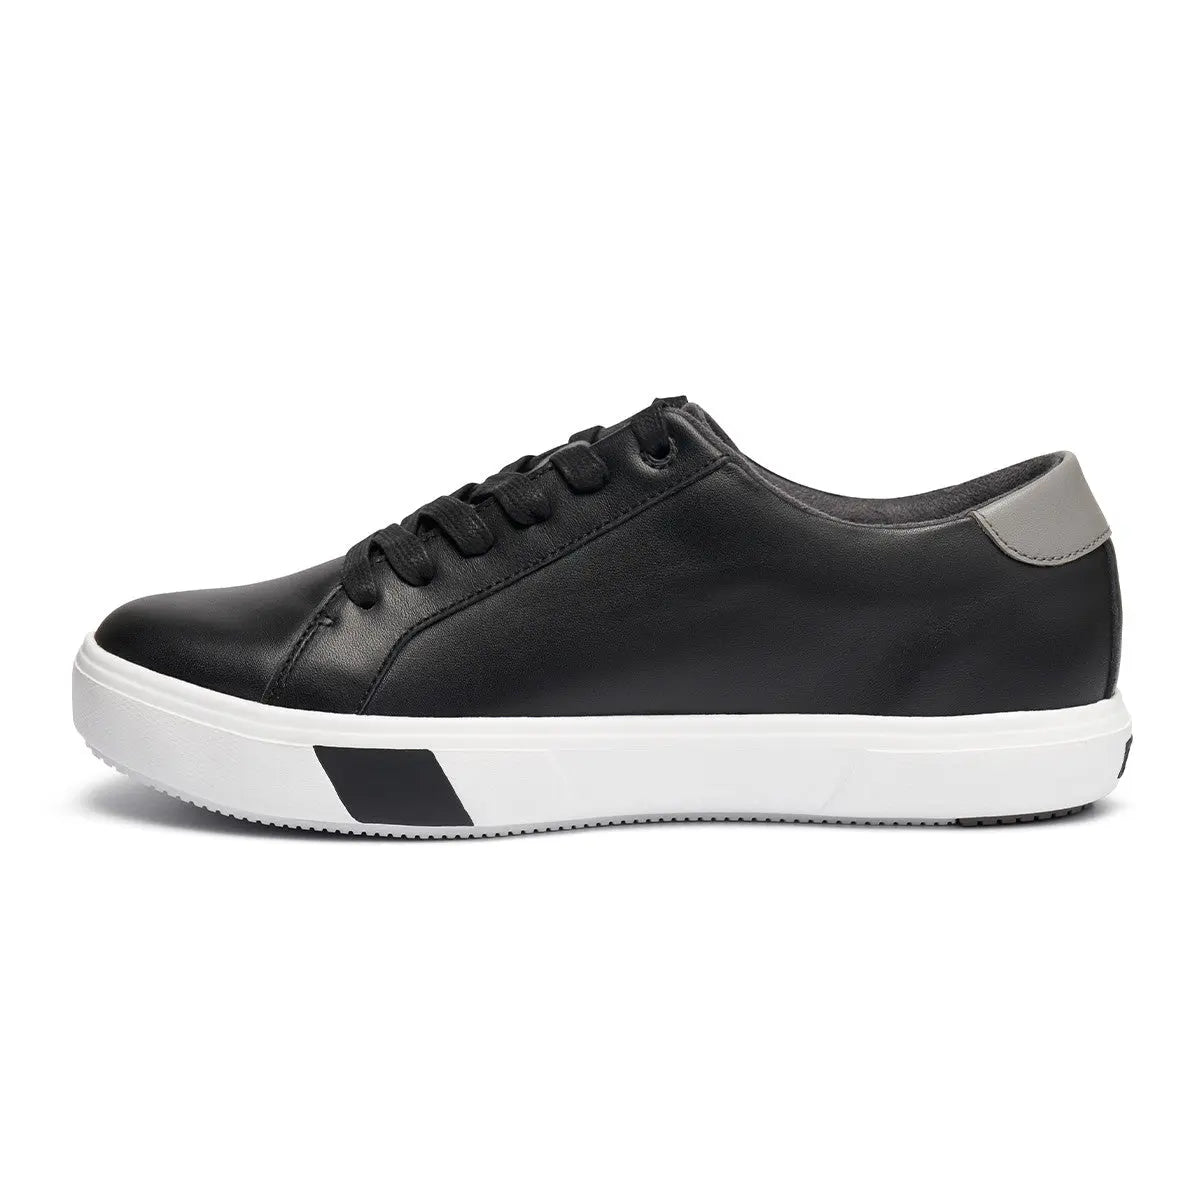 Anodyne Women's No.27 Casual Sneaker, Black with nappa leather